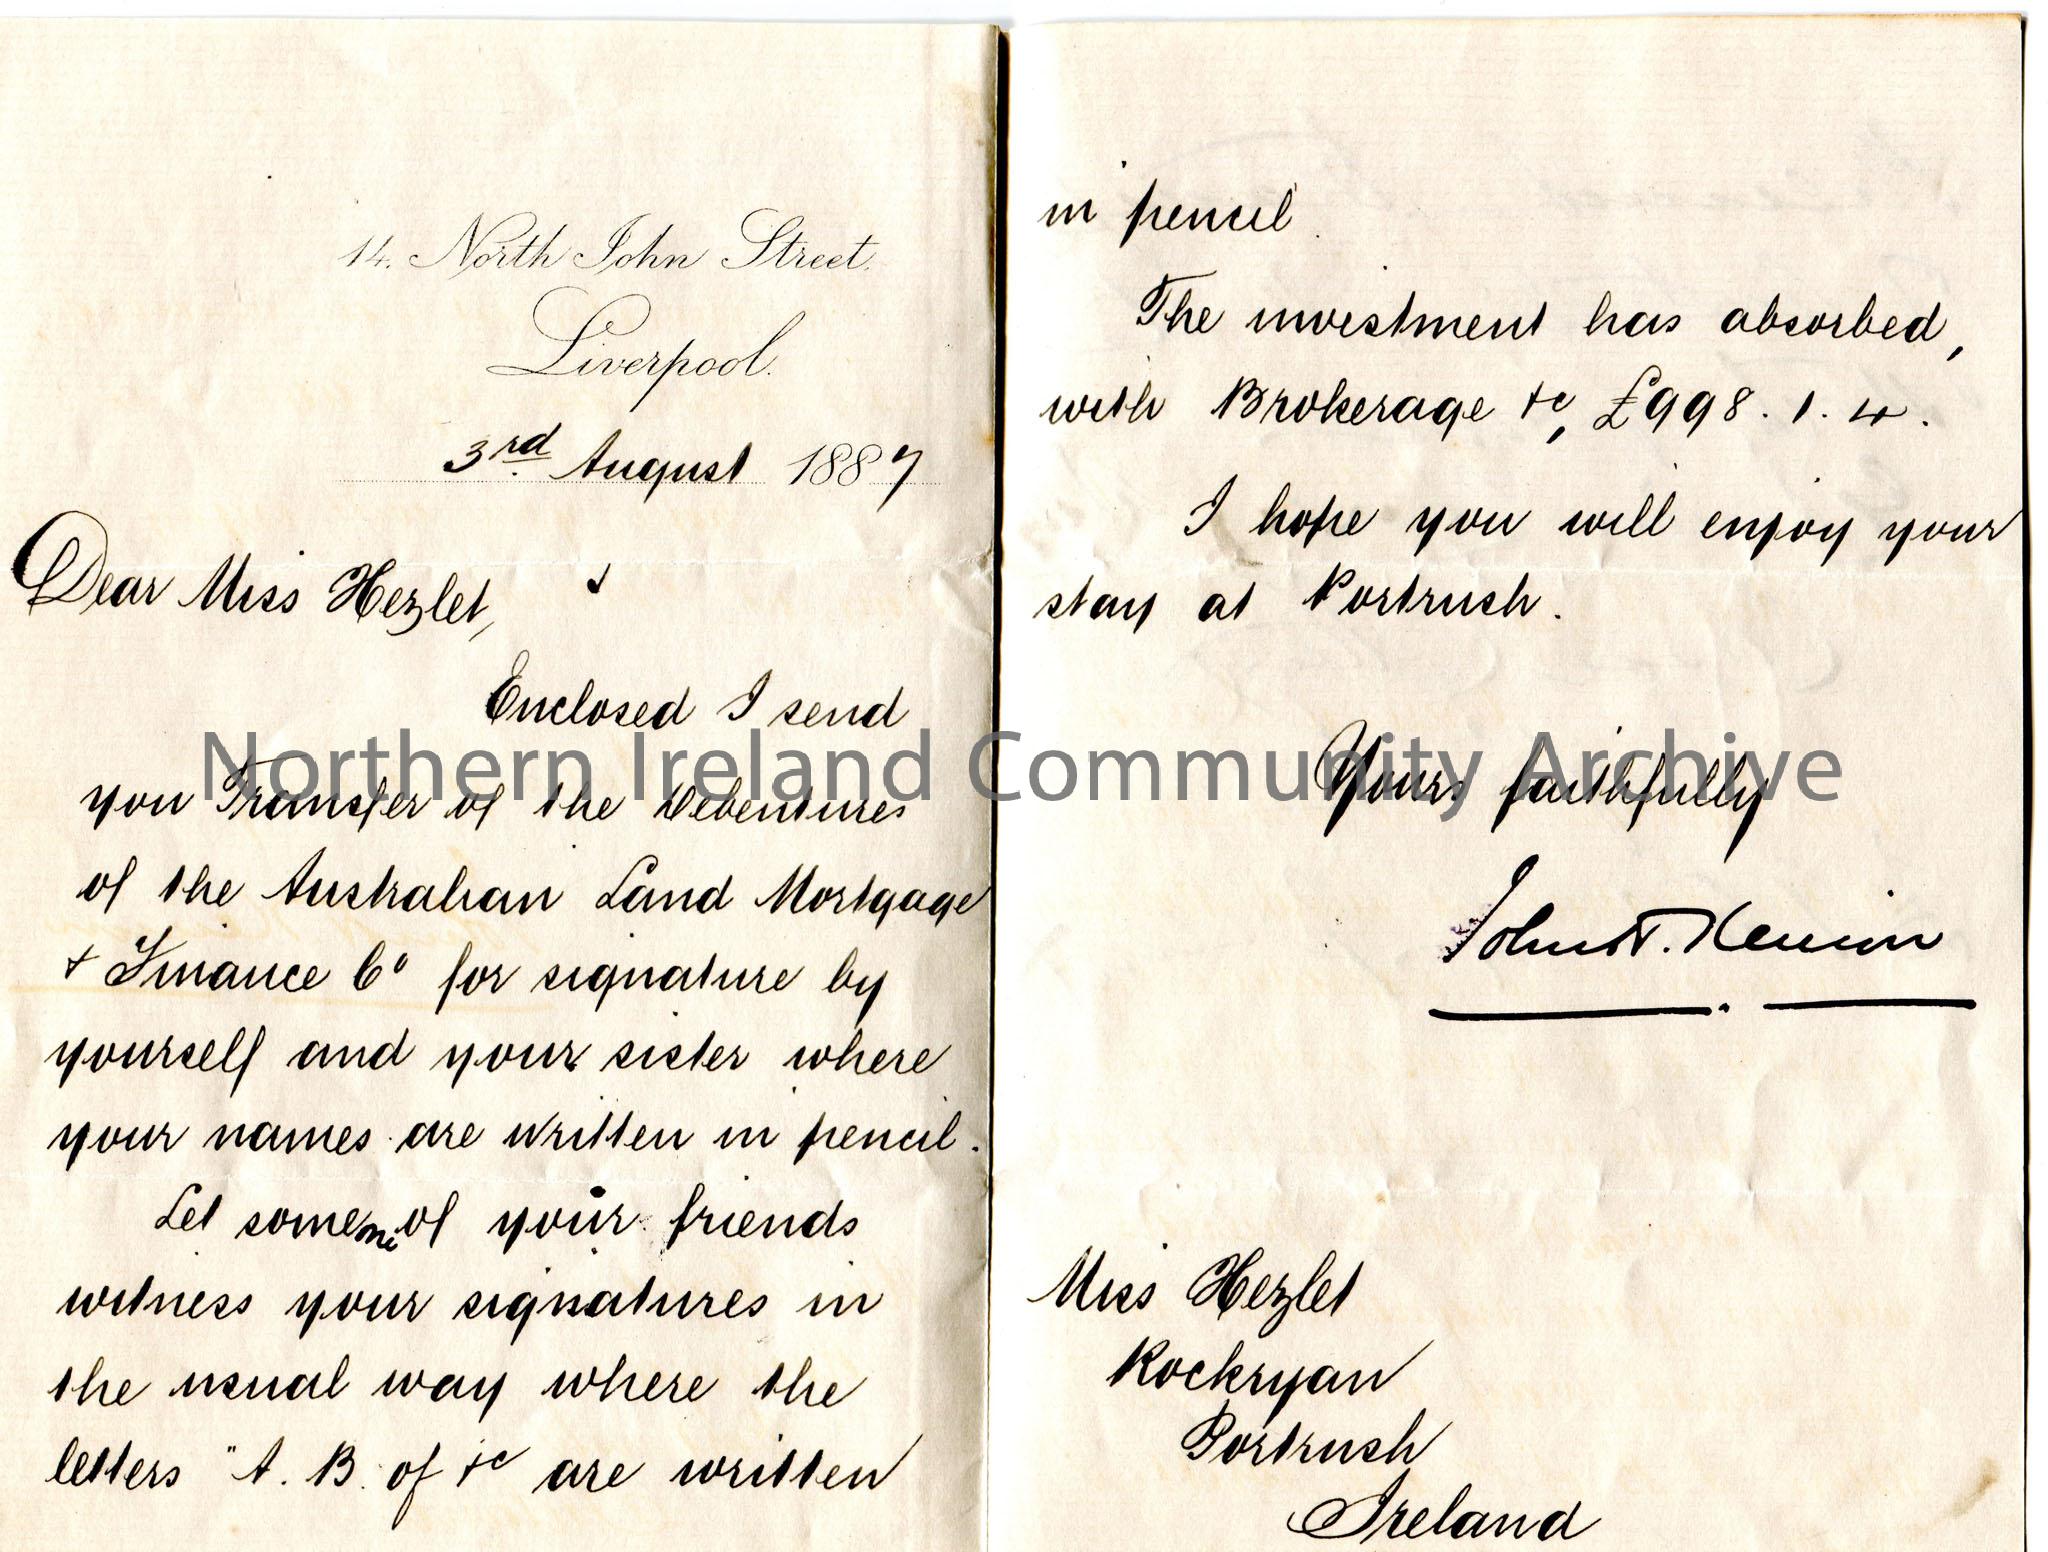 Handwritten letter to Miss Hezlet at Rockryan, Portrush, Ireland. Encloses transfer of the Debentures of the Australian Land Mortgage and Finance Comp…